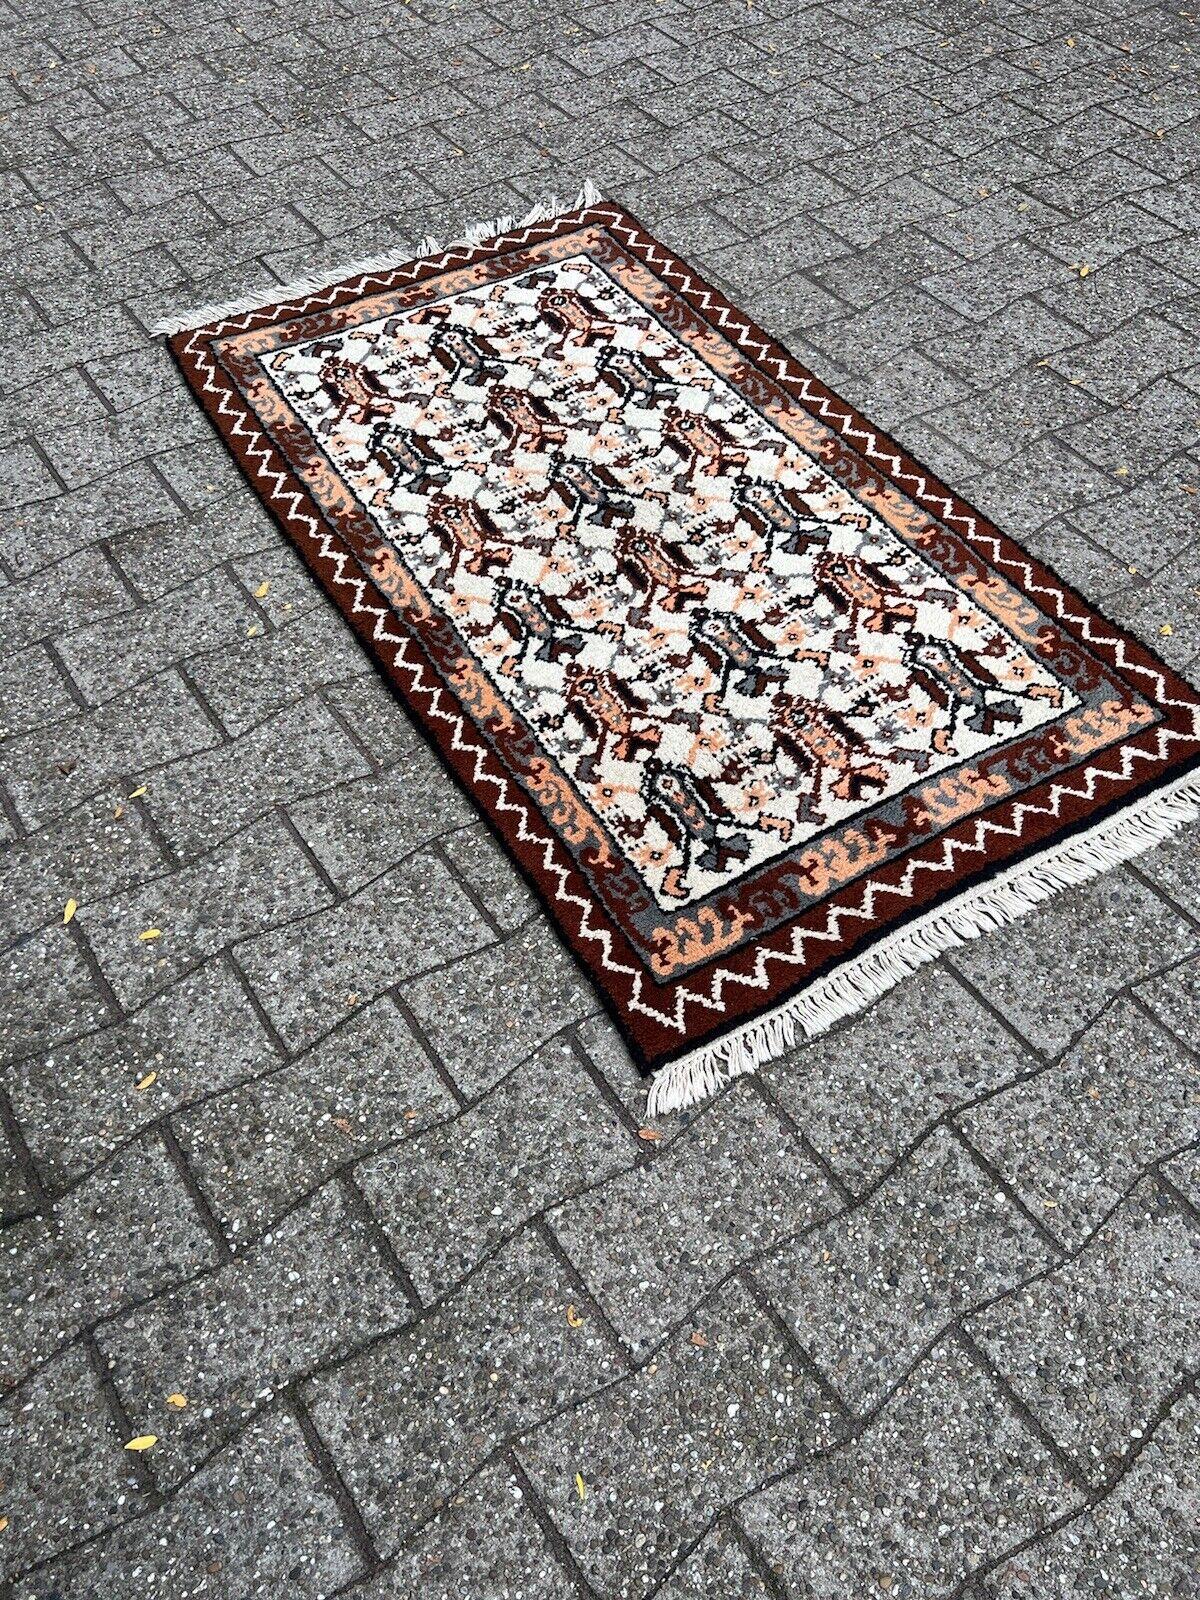 Step into the world of North African artistry with this Handmade Vintage Tunisian Berber Rug. Crafted in the 1970s, this rug measures 2.7’ x 4.9’ (83cm x 151cm) and is a beautiful representation of Berber cultural heritage.

The rug is in good